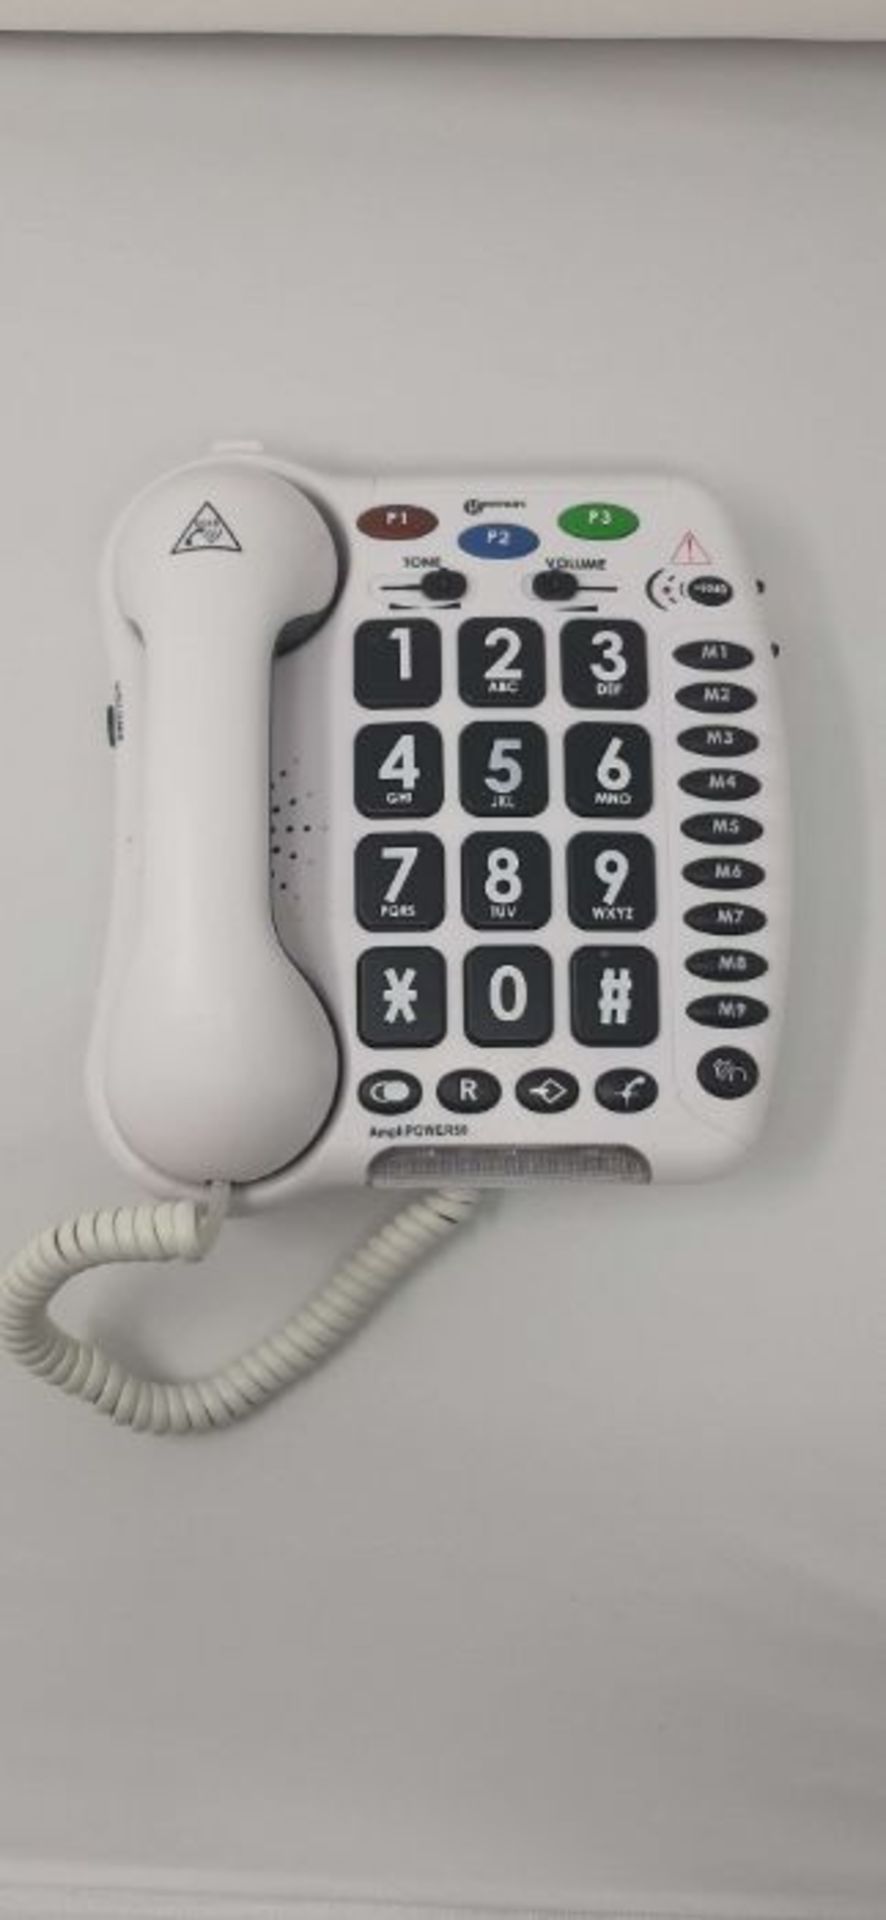 RRP £68.00 Geemarc AMPLIPOWER 50 - Extra Loud 60 dB Big Button Corded Telephone- UK Version, Whit - Image 2 of 2